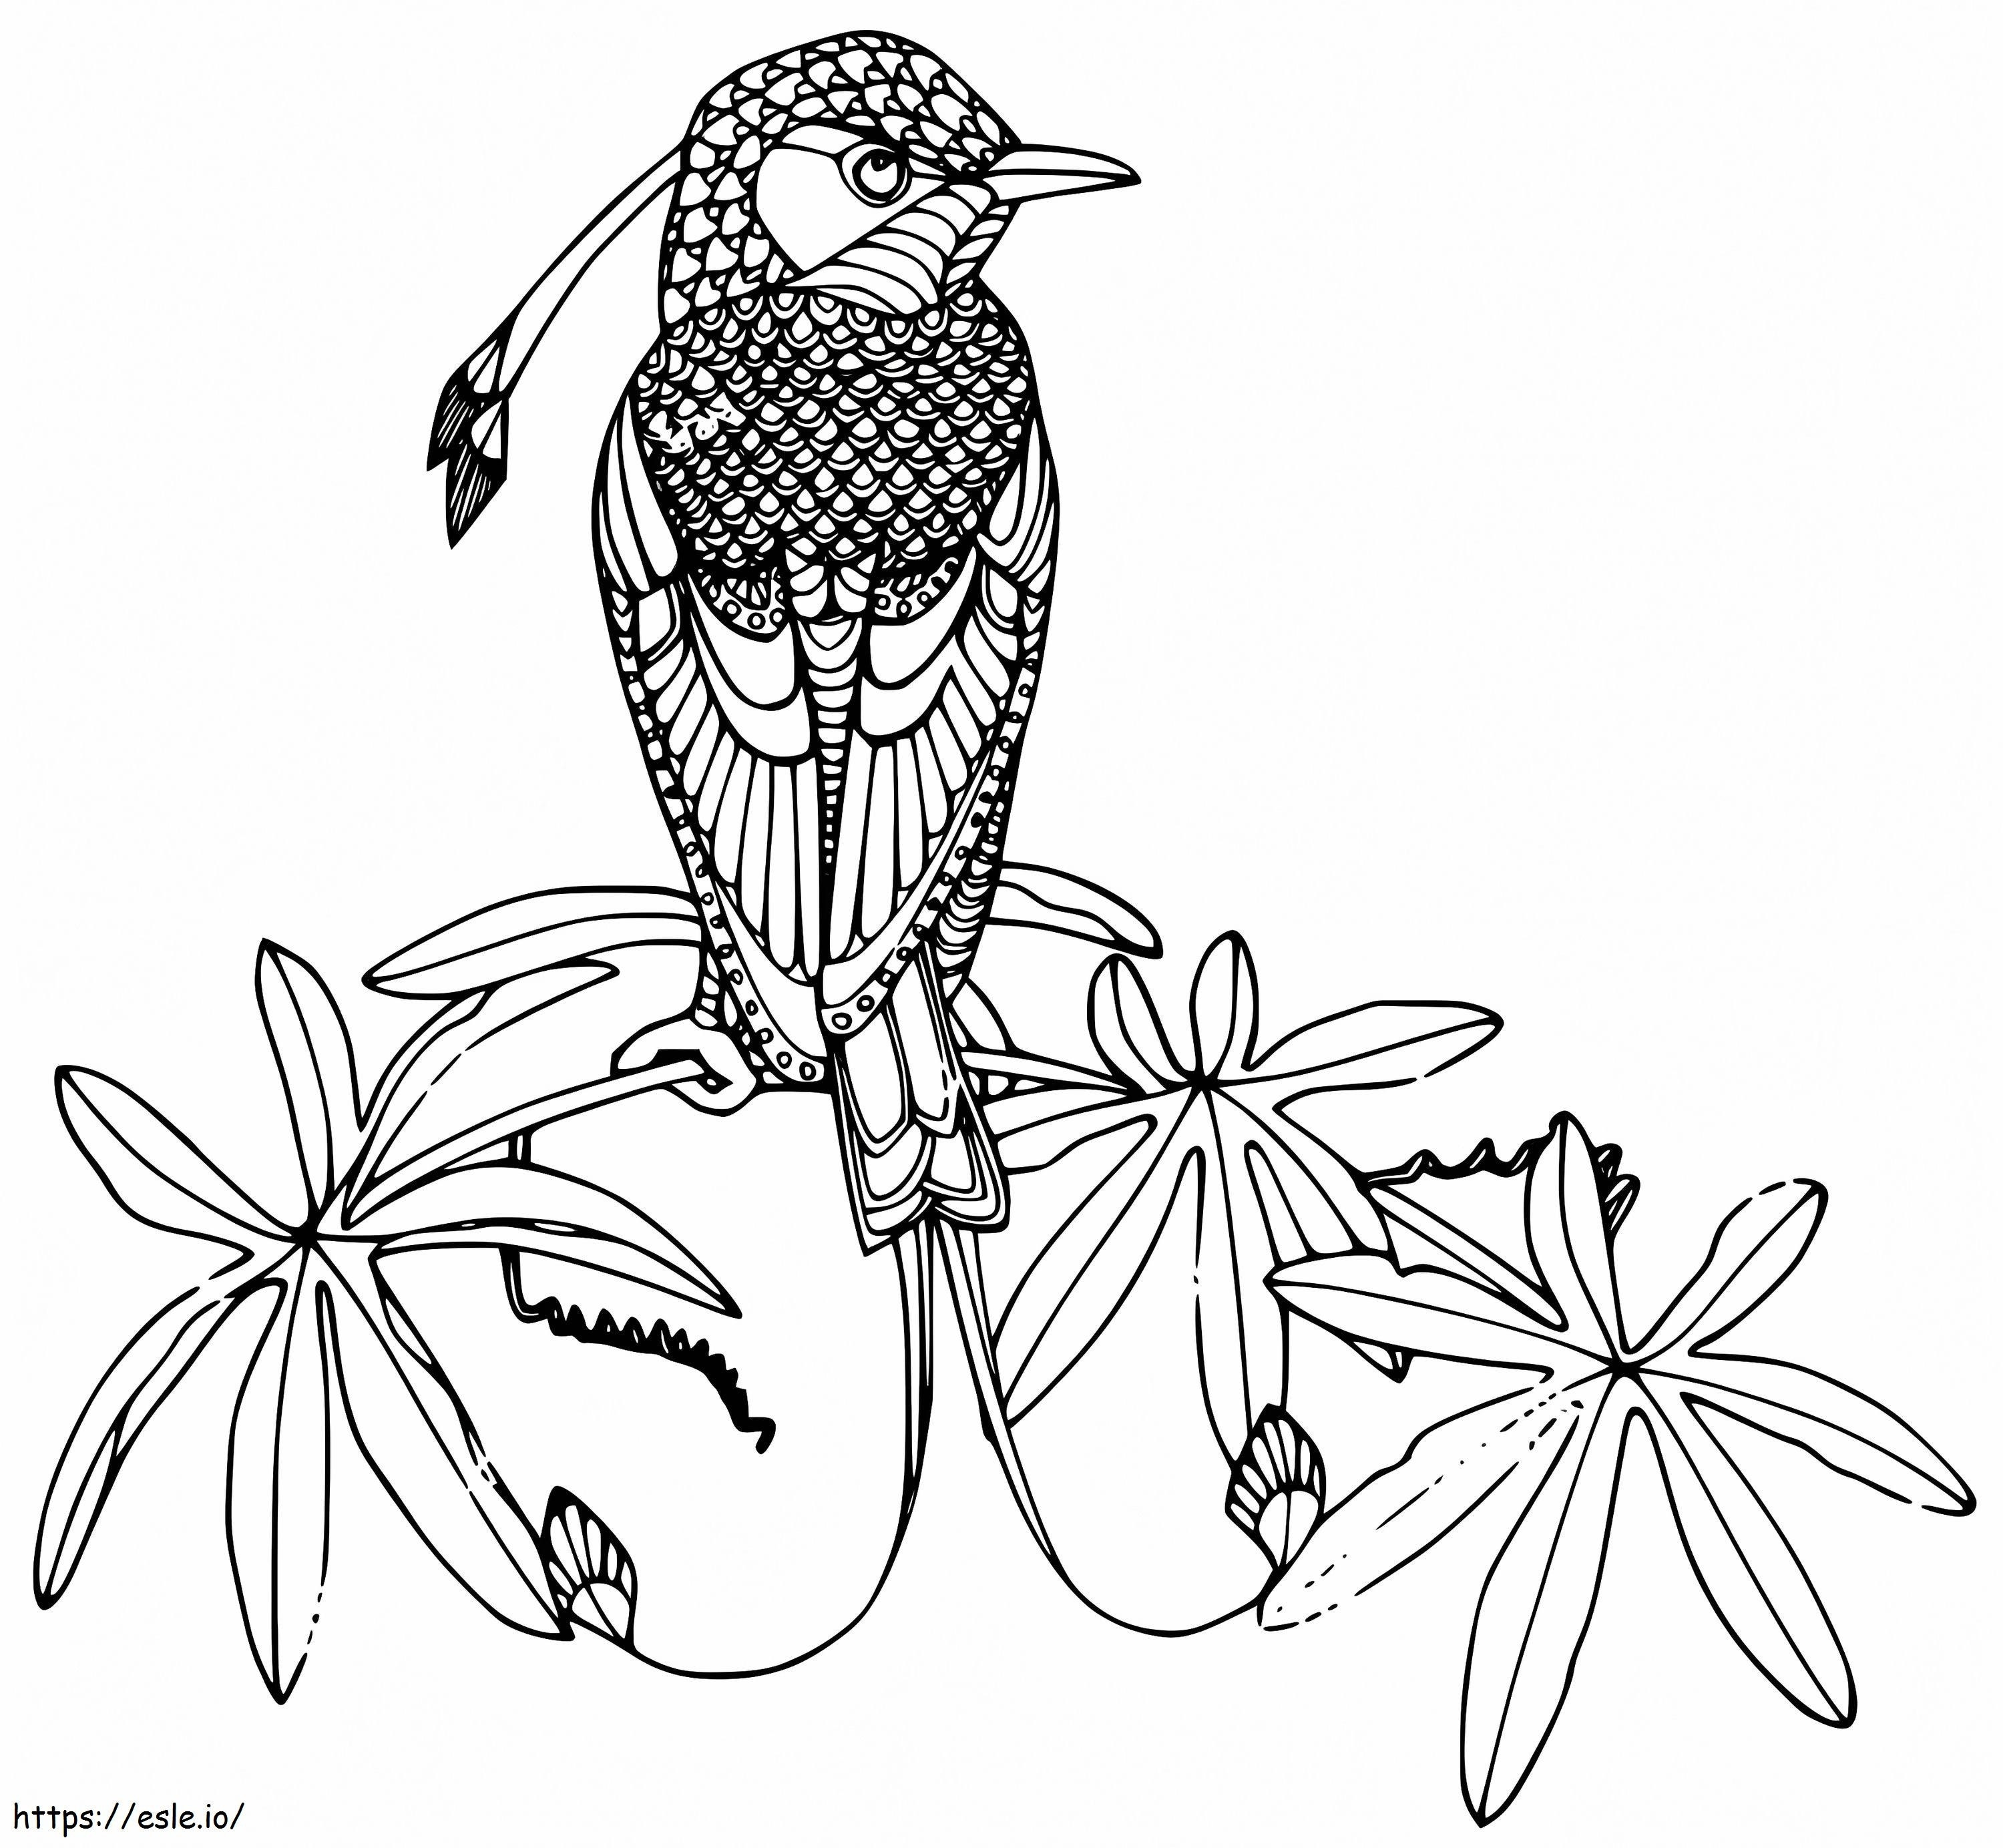 Bird Of Paradise 8 coloring page